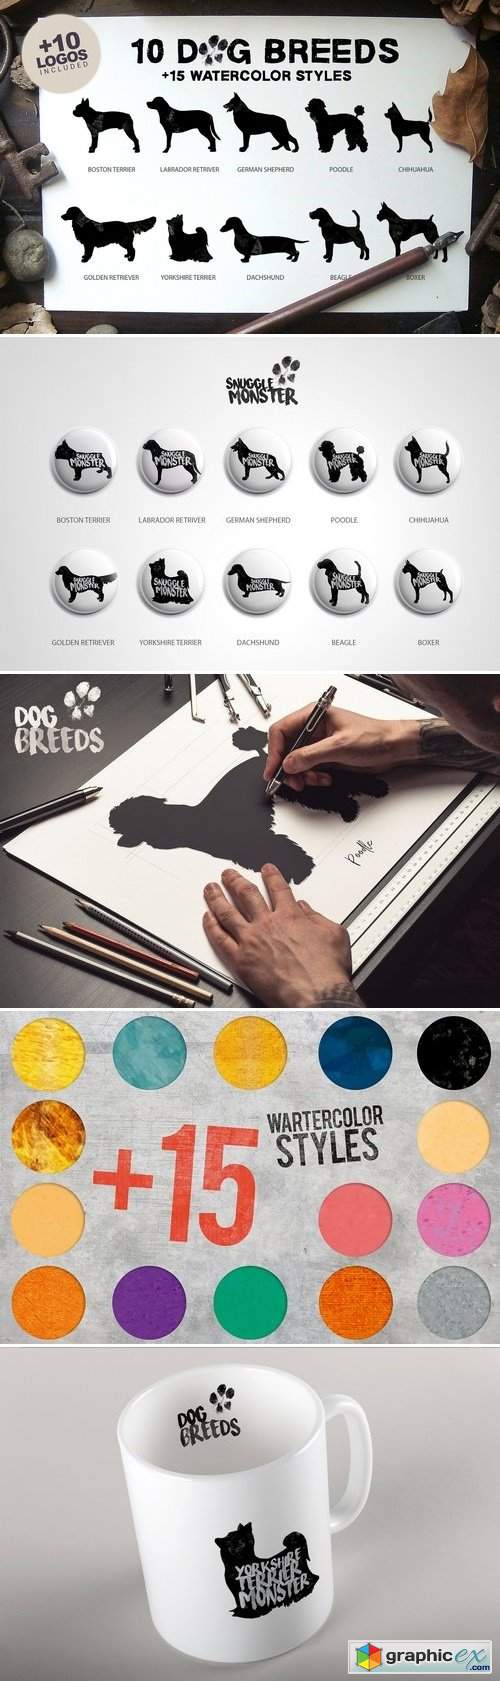 10 Dog Breeds + 15 Watercolor Styles 392548